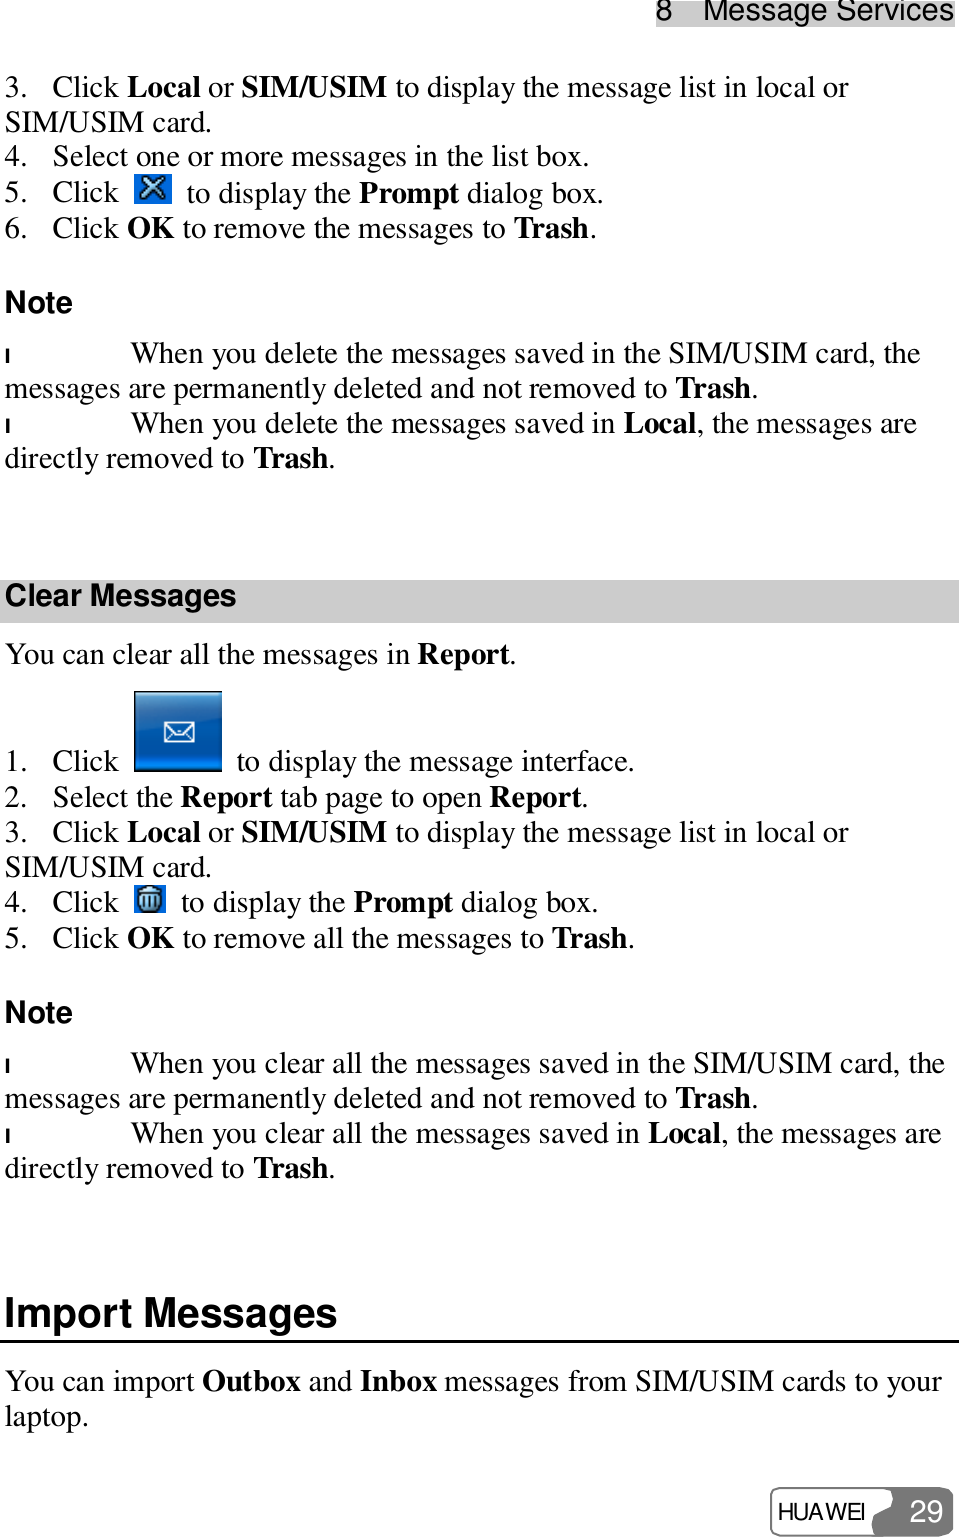 8  Message Services HUAWEI  29 3. Click Local or SIM/USIM to display the message list in local or SIM/USIM card. 4. Select one or more messages in the list box. 5. Click   to display the Prompt dialog box. 6. Click OK to remove the messages to Trash. Note  l When you delete the messages saved in the SIM/USIM card, the messages are permanently deleted and not removed to Trash. l When you delete the messages saved in Local, the messages are directly removed to Trash.  Clear Messages You can clear all the messages in Report. 1. Click   to display the message interface. 2. Select the Report tab page to open Report. 3. Click Local or SIM/USIM to display the message list in local or SIM/USIM card. 4. Click   to display the Prompt dialog box. 5. Click OK to remove all the messages to Trash. Note  l When you clear all the messages saved in the SIM/USIM card, the messages are permanently deleted and not removed to Trash. l When you clear all the messages saved in Local, the messages are directly removed to Trash.  Import Messages You can import Outbox and Inbox messages from SIM/USIM cards to your laptop. 